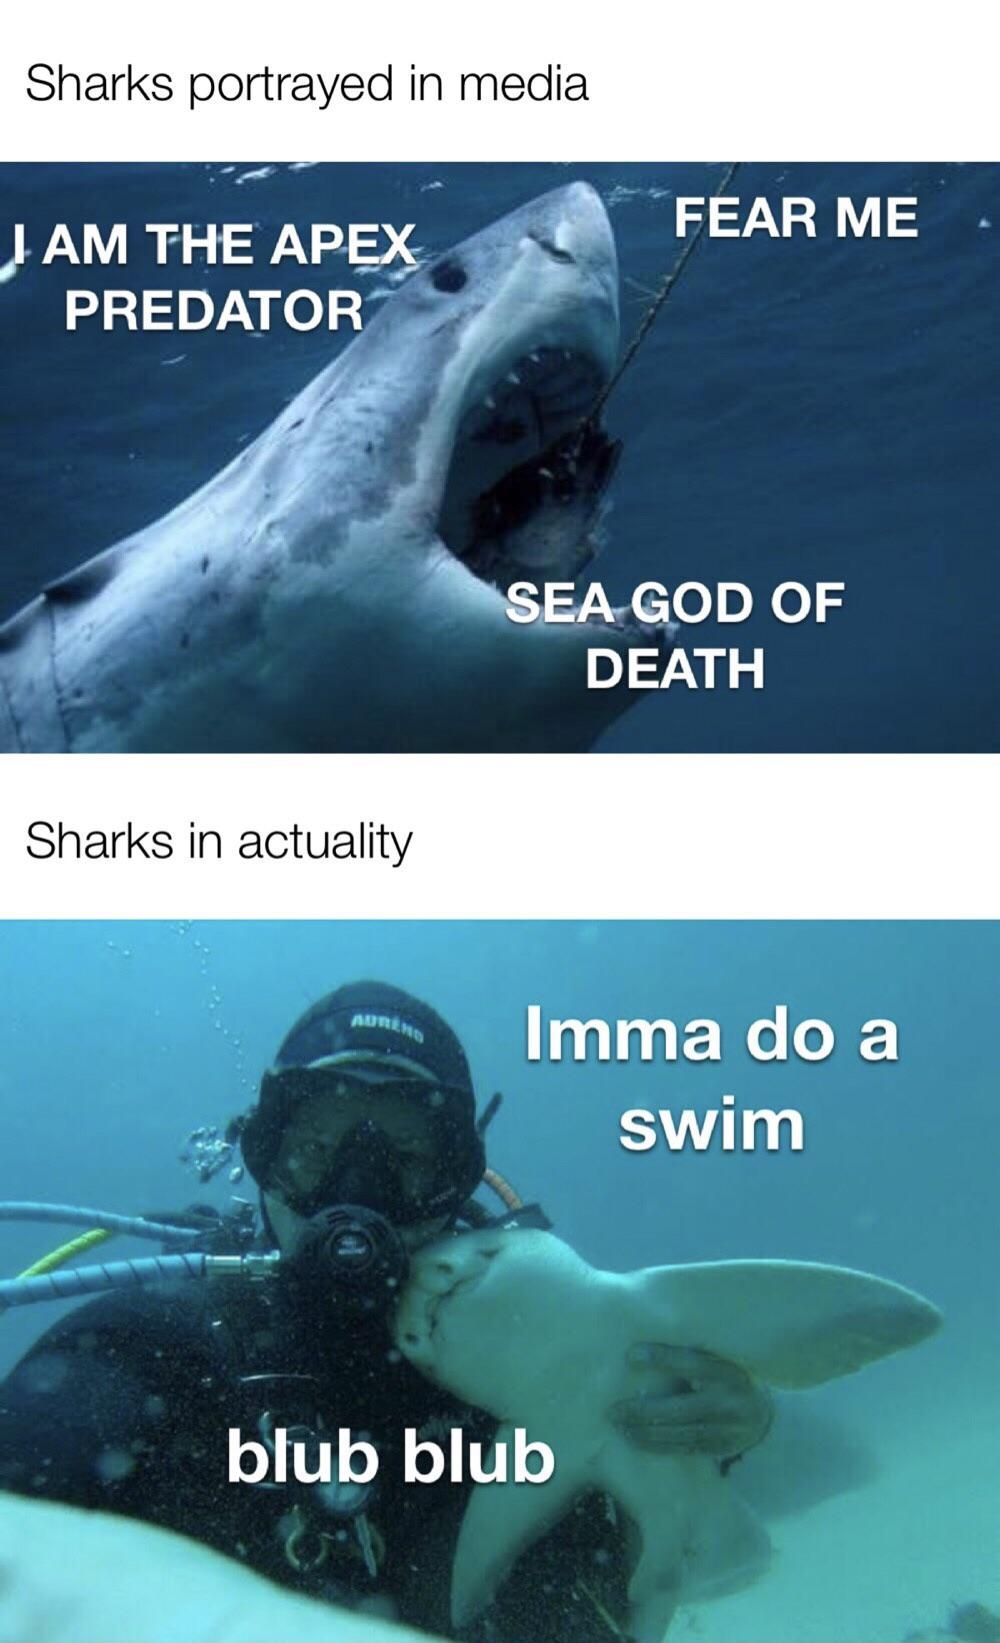 Sharks are cute